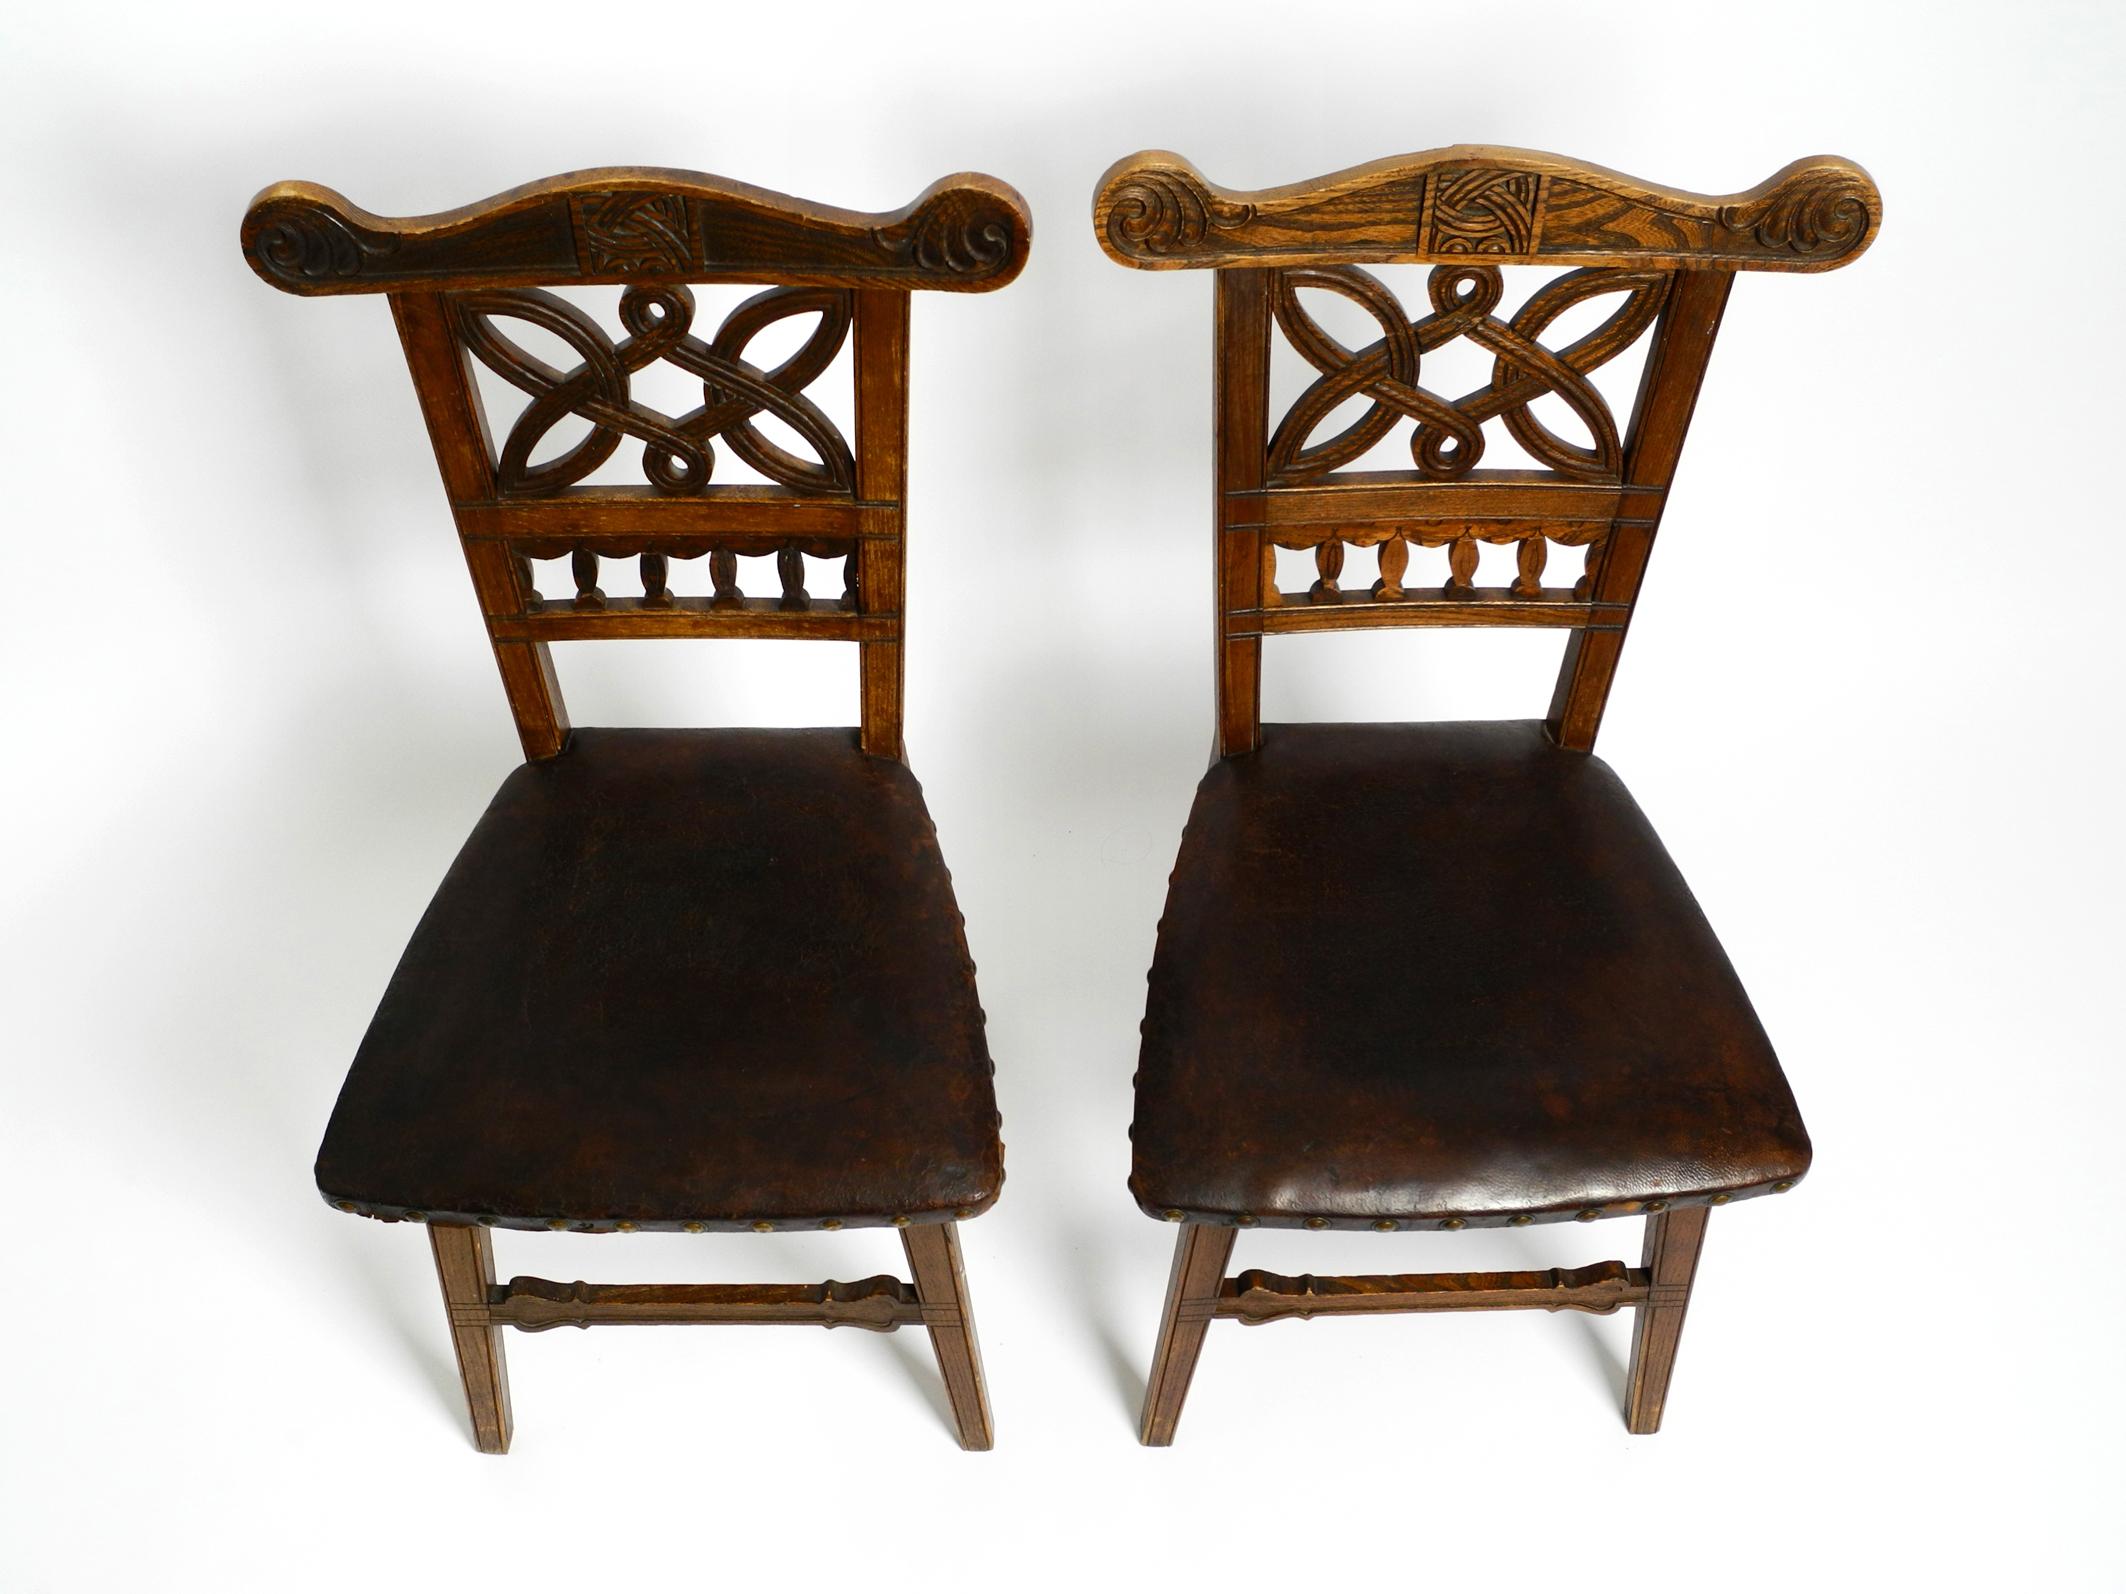 French 2 Art Nouveau Oak Chairs Still with the Original Leather Seats from Around 1900 For Sale